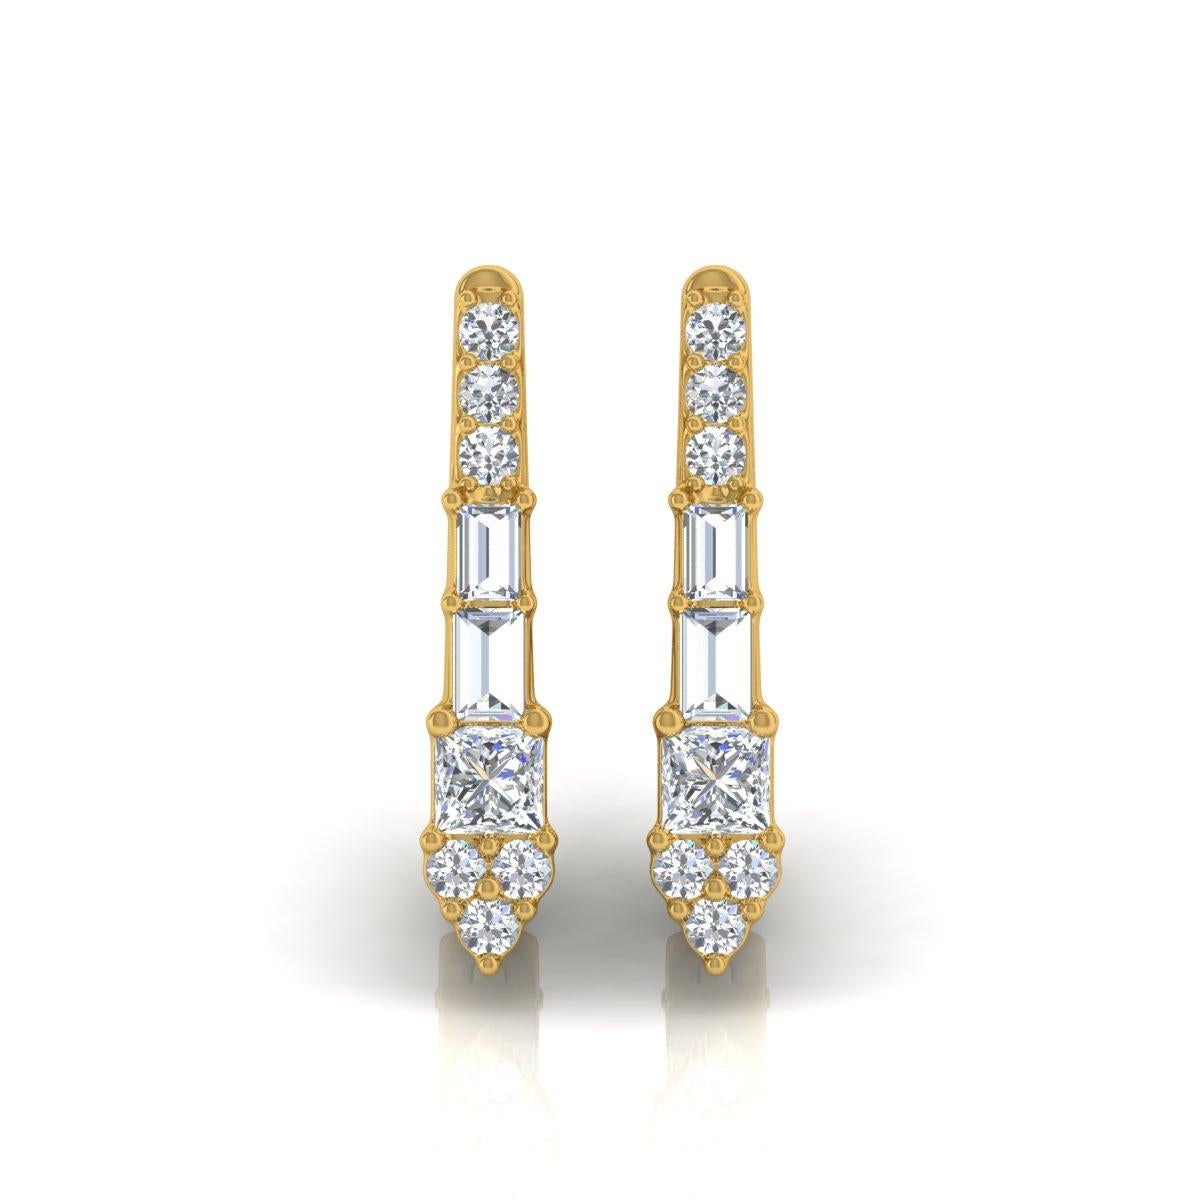 Item Code :- SEE-11943
Gross Weight :- 2.72 gm
18k Yellow Gold Weight :- 2.61 gm
Diamond Weight :- 0.56 Carat  ( AVERAGE DIAMOND CLARITY SI1-SI2 & COLOR H-I )
Earrings Length :- 18 mm approx.
✦ Sizing
.....................
We can adjust most items